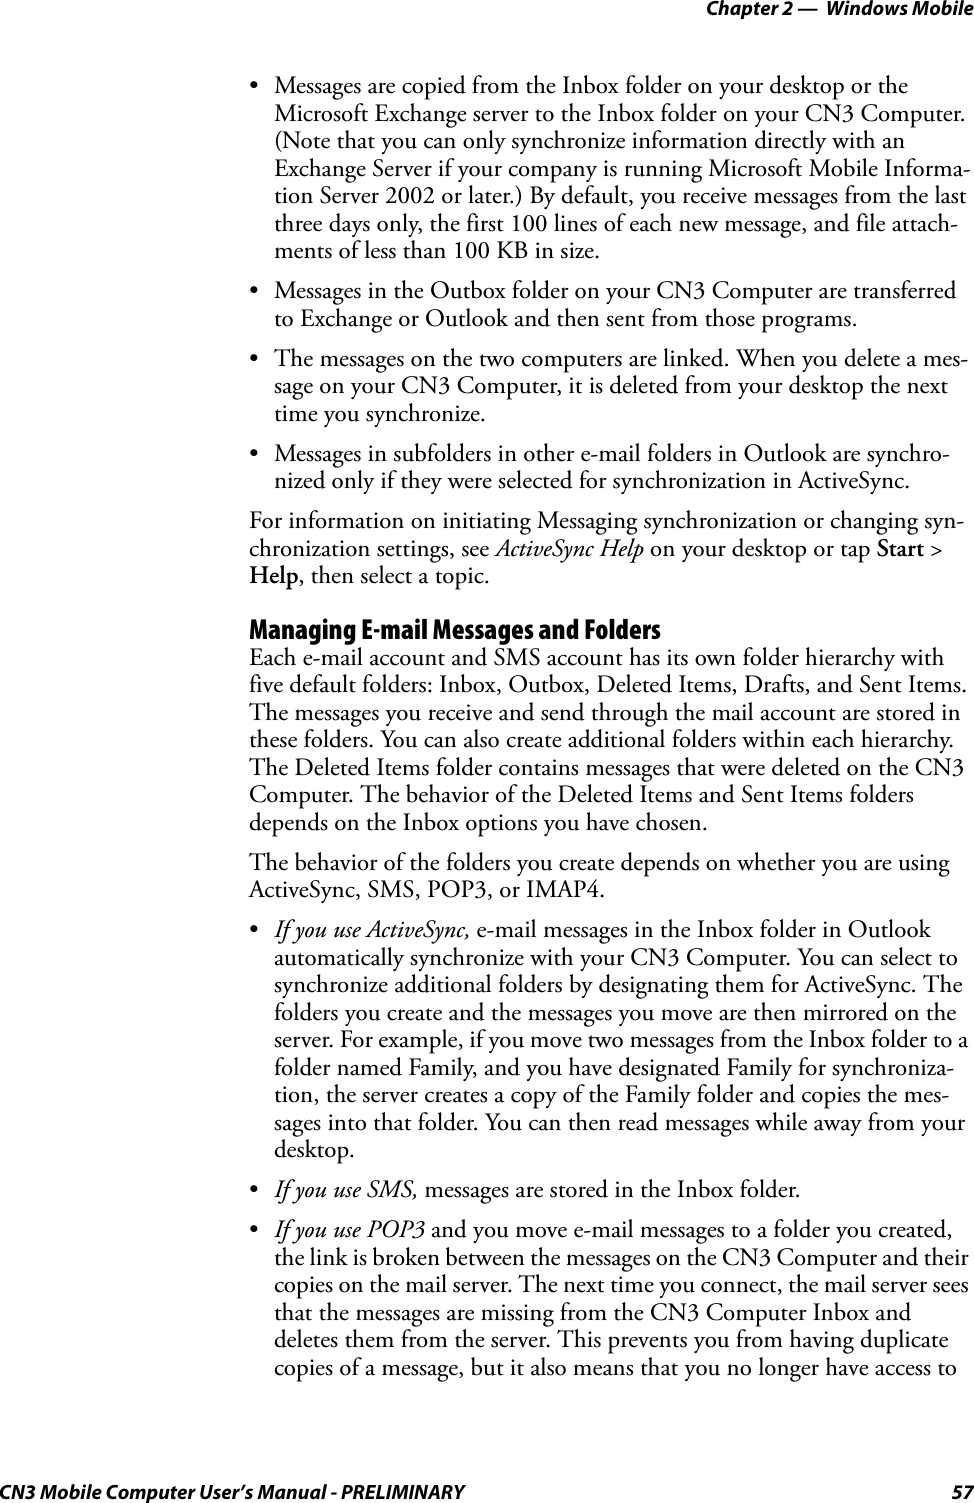 Chapter 2 —  Windows MobileCN3 Mobile Computer User’s Manual - PRELIMINARY 57• Messages are copied from the Inbox folder on your desktop or the Microsoft Exchange server to the Inbox folder on your CN3 Computer. (Note that you can only synchronize information directly with an Exchange Server if your company is running Microsoft Mobile Informa-tion Server 2002 or later.) By default, you receive messages from the last three days only, the first 100 lines of each new message, and file attach-ments of less than 100 KB in size.• Messages in the Outbox folder on your CN3 Computer are transferred to Exchange or Outlook and then sent from those programs.• The messages on the two computers are linked. When you delete a mes-sage on your CN3 Computer, it is deleted from your desktop the next time you synchronize.• Messages in subfolders in other e-mail folders in Outlook are synchro-nized only if they were selected for synchronization in ActiveSync.For information on initiating Messaging synchronization or changing syn-chronization settings, see ActiveSync Help on your desktop or tap Start &gt; Help, then select a topic.Managing E-mail Messages and FoldersEach e-mail account and SMS account has its own folder hierarchy with five default folders: Inbox, Outbox, Deleted Items, Drafts, and Sent Items. The messages you receive and send through the mail account are stored in these folders. You can also create additional folders within each hierarchy. The Deleted Items folder contains messages that were deleted on the CN3 Computer. The behavior of the Deleted Items and Sent Items folders depends on the Inbox options you have chosen.The behavior of the folders you create depends on whether you are using ActiveSync, SMS, POP3, or IMAP4.•If you use ActiveSync, e-mail messages in the Inbox folder in Outlook automatically synchronize with your CN3 Computer. You can select to synchronize additional folders by designating them for ActiveSync. The folders you create and the messages you move are then mirrored on the server. For example, if you move two messages from the Inbox folder to a folder named Family, and you have designated Family for synchroniza-tion, the server creates a copy of the Family folder and copies the mes-sages into that folder. You can then read messages while away from your desktop.•If you use SMS, messages are stored in the Inbox folder.•If you use POP3 and you move e-mail messages to a folder you created, the link is broken between the messages on the CN3 Computer and their copies on the mail server. The next time you connect, the mail server sees that the messages are missing from the CN3 Computer Inbox and deletes them from the server. This prevents you from having duplicate copies of a message, but it also means that you no longer have access to 